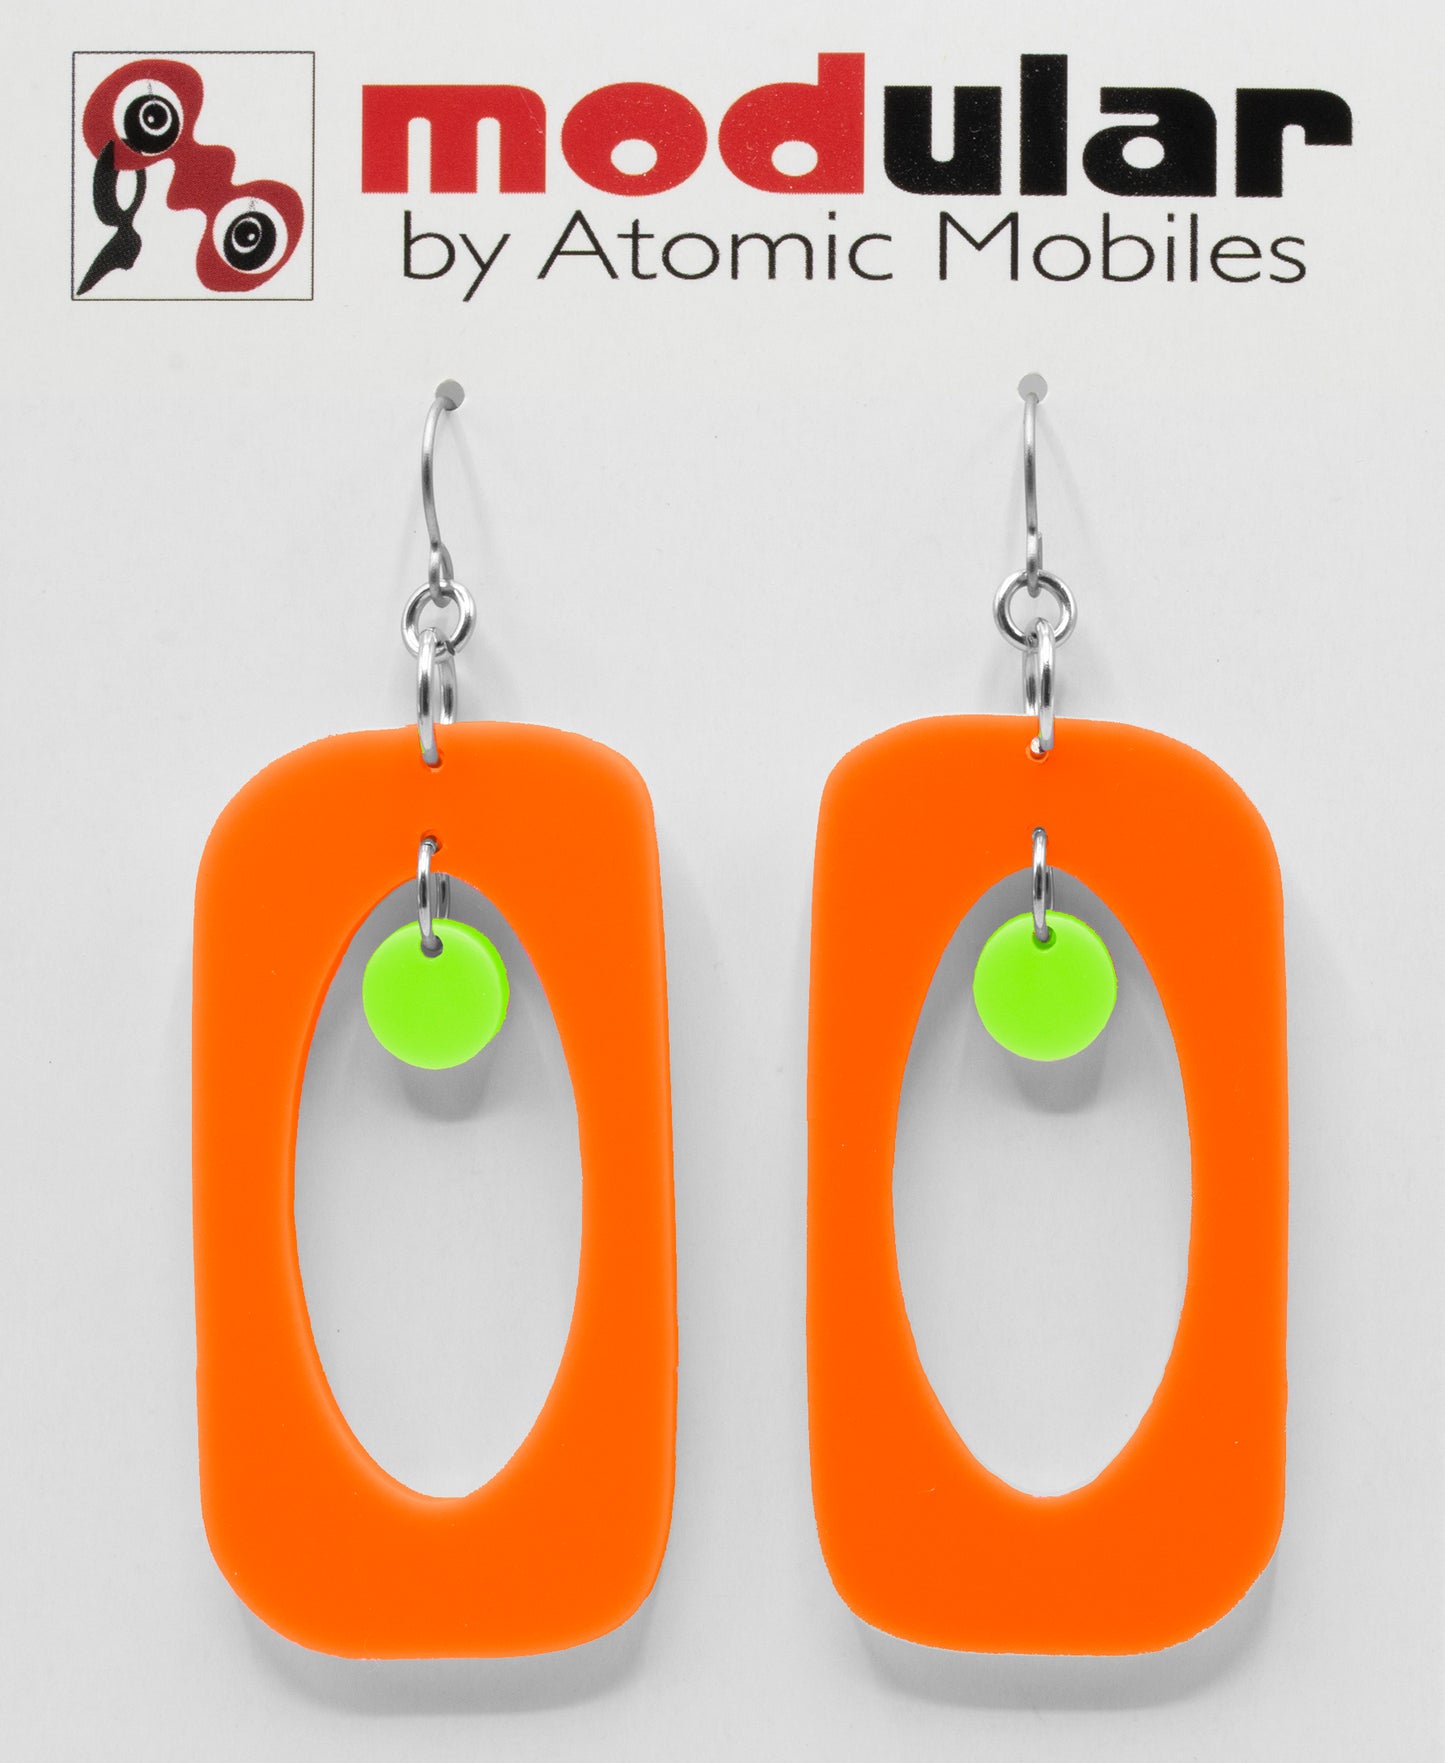 MODular Earrings - Beatnik Boho Statement Earrings in Orange and Lime - Palm Springs Colors - by AtomicMobiles.com - retro era inspired mod handmade jewelry